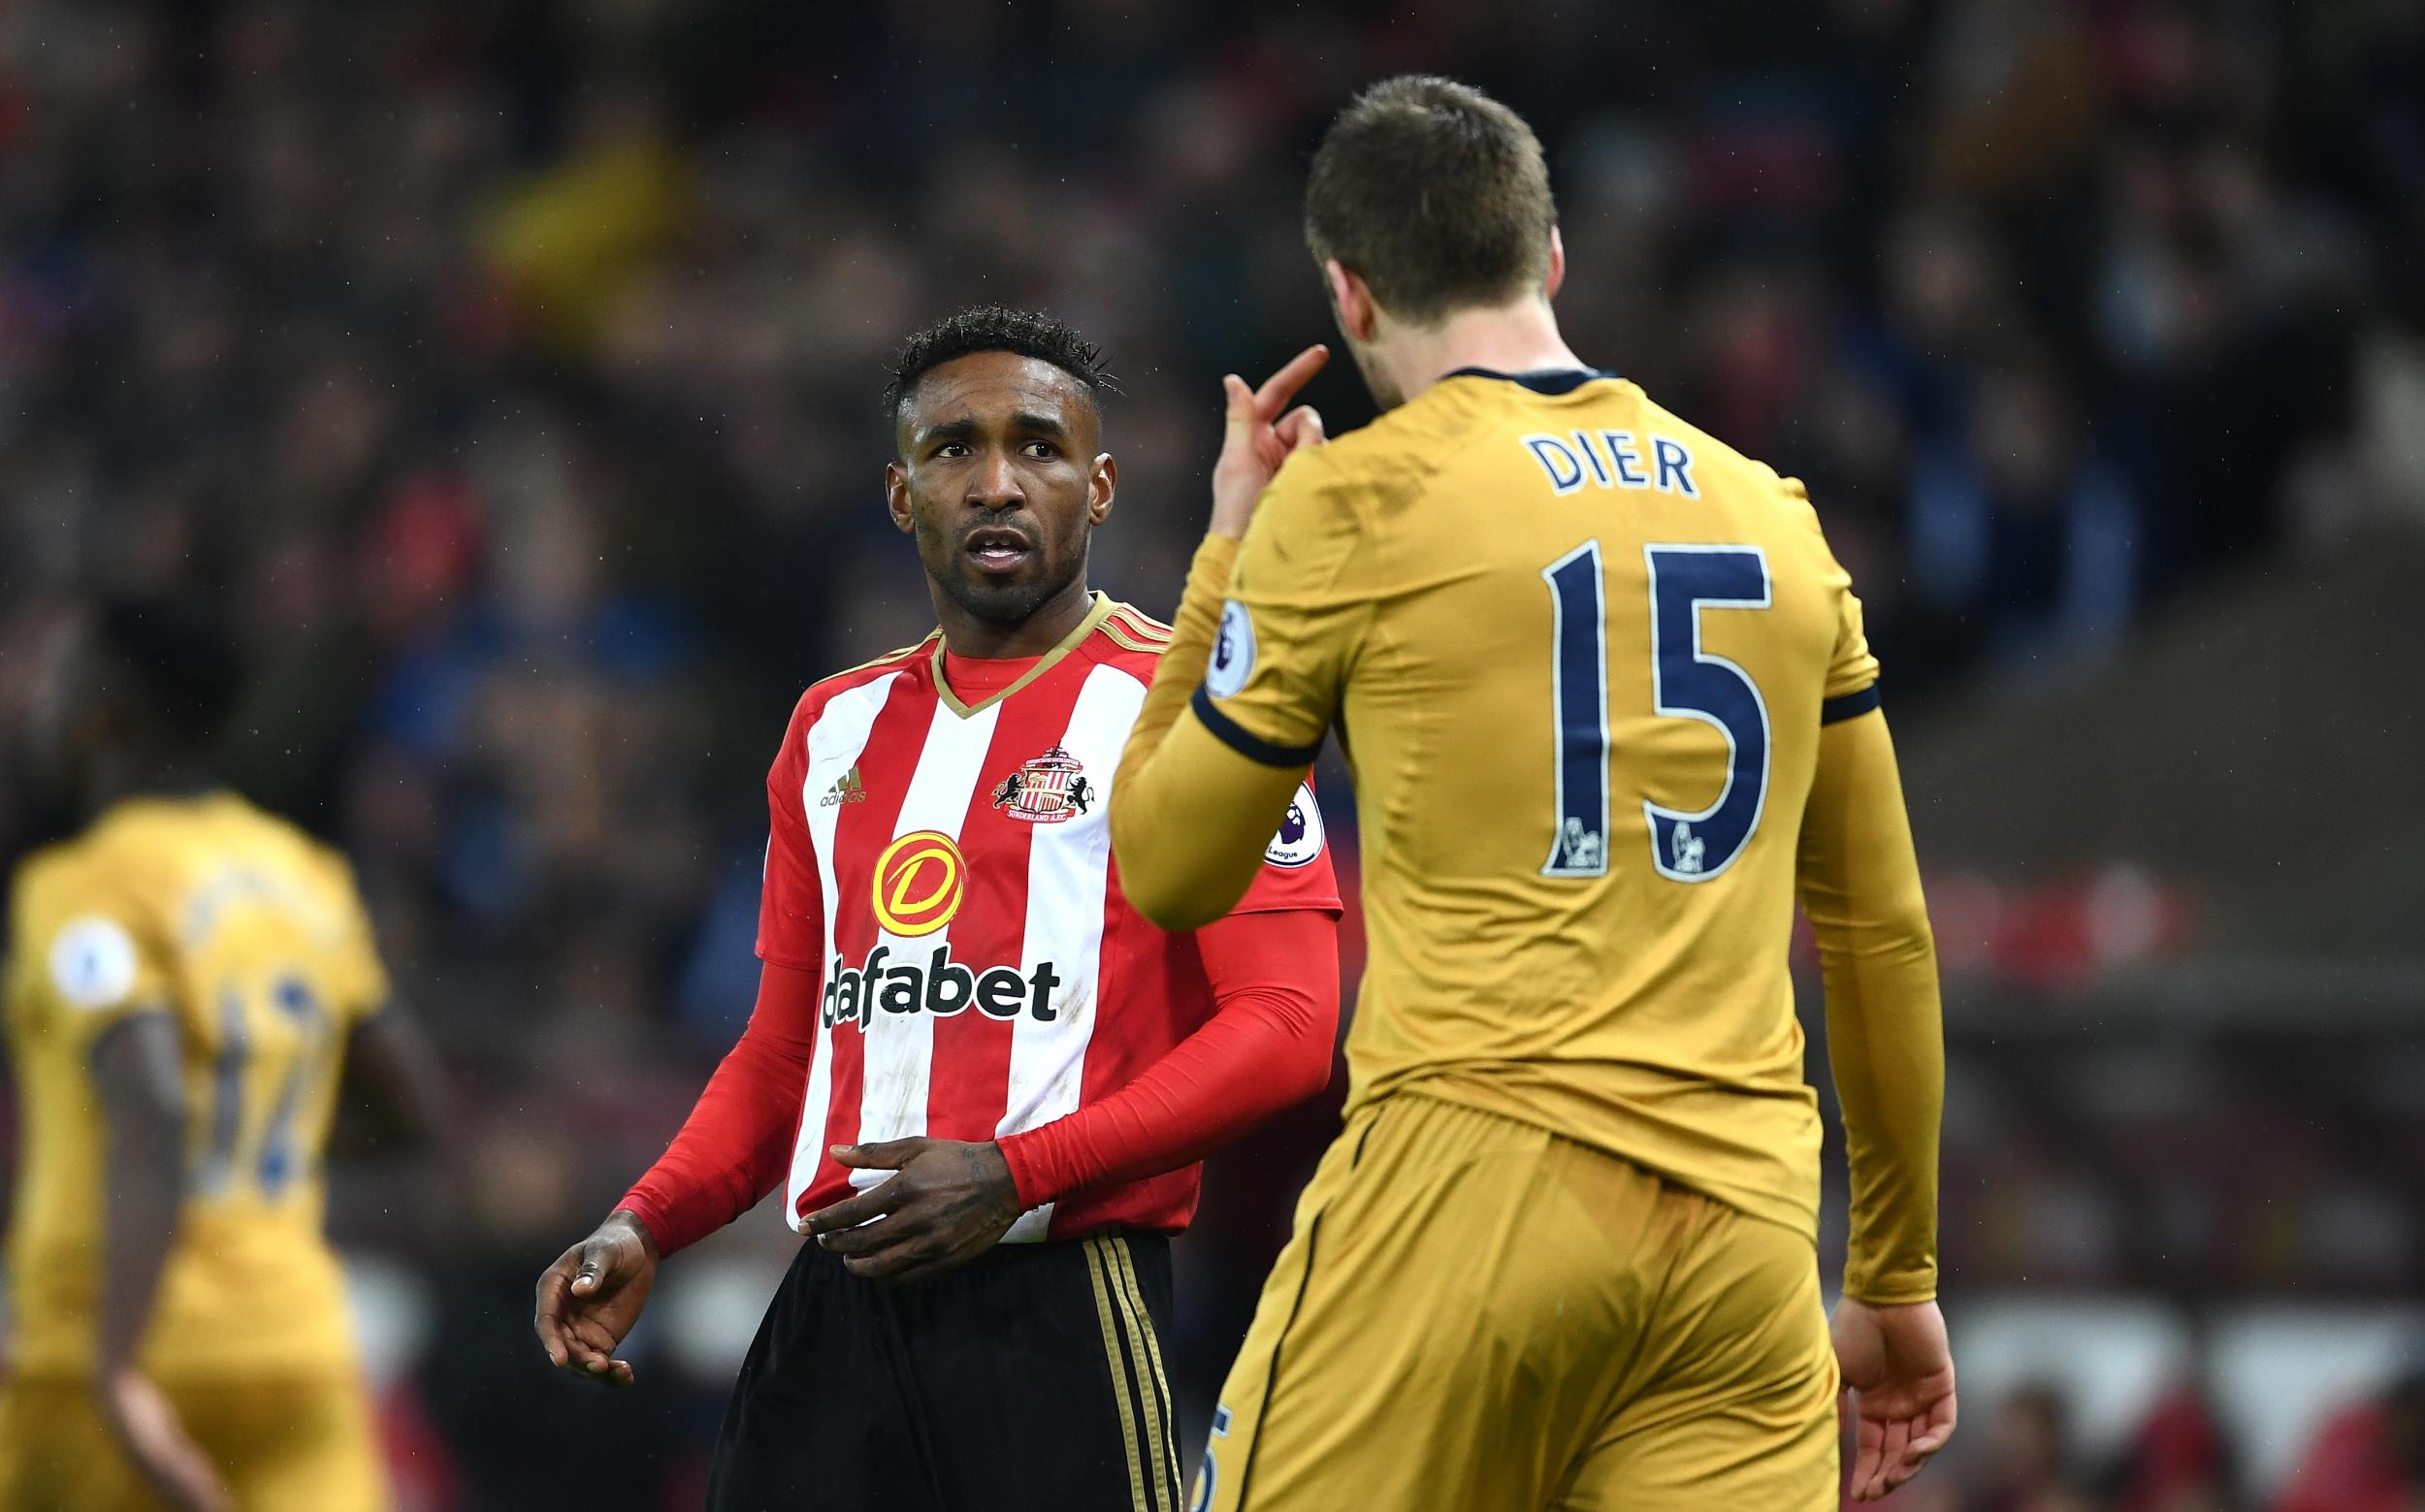 Eric Dier and Jermain Defoe went toe-to-toe but both will feel like they lost out